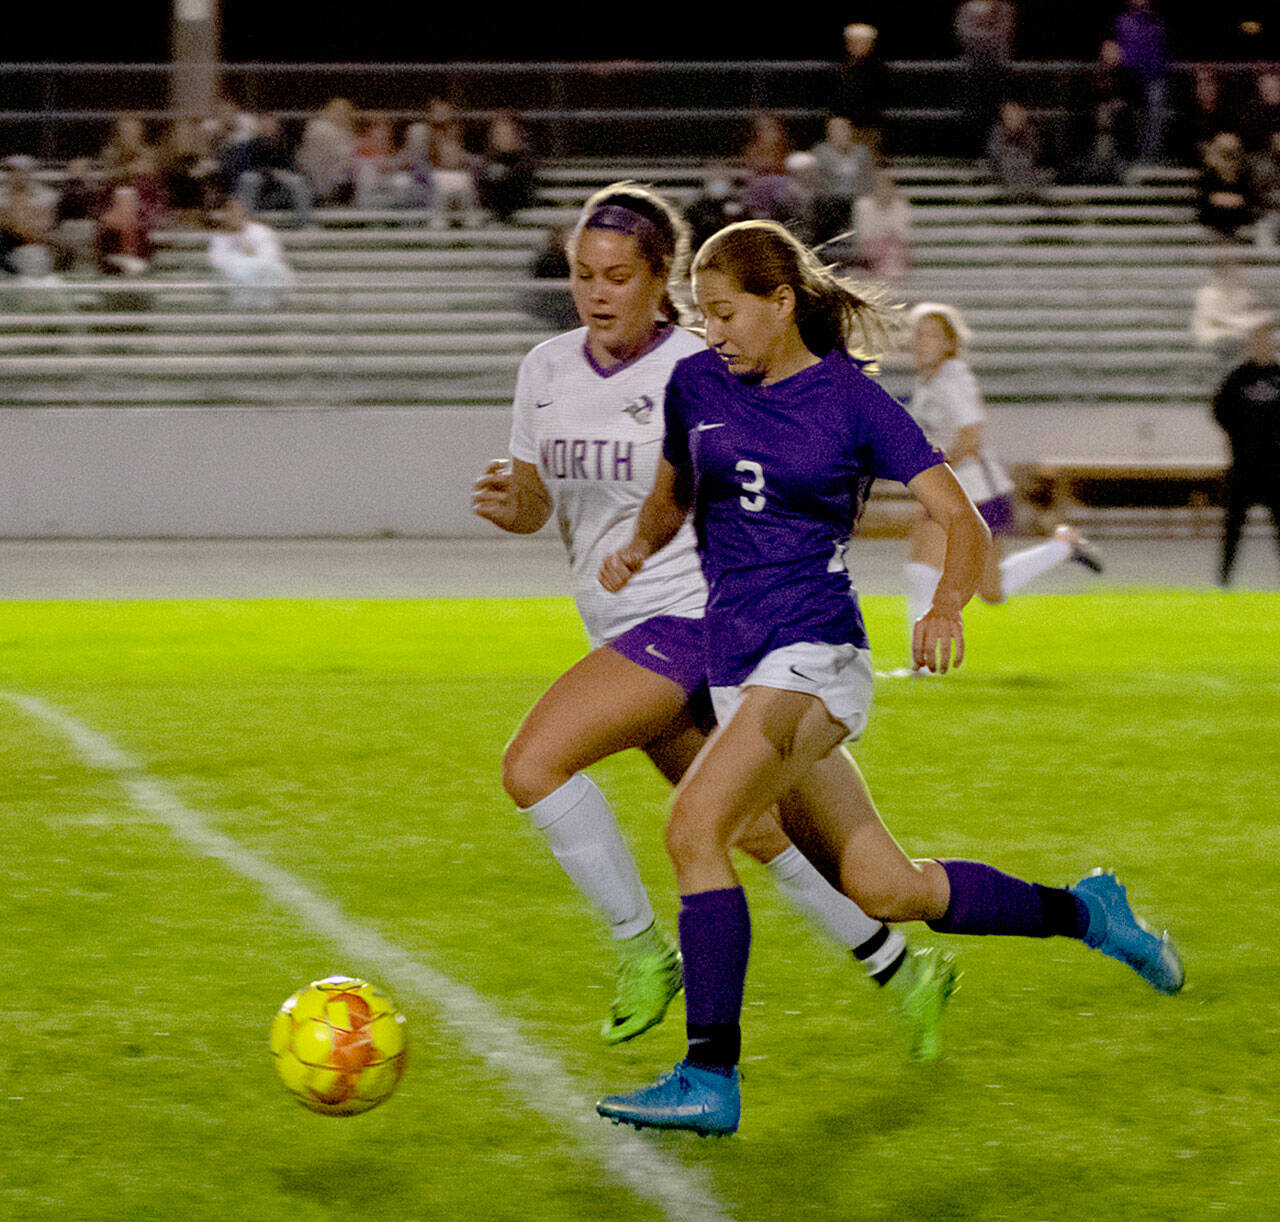 Sequim Gazette file photo by Emily Matthiessen
Sequim’s Taryn Johnson, pictured here in a home match-up with North Kitsap in 2021, scored 24 goals as a junior.